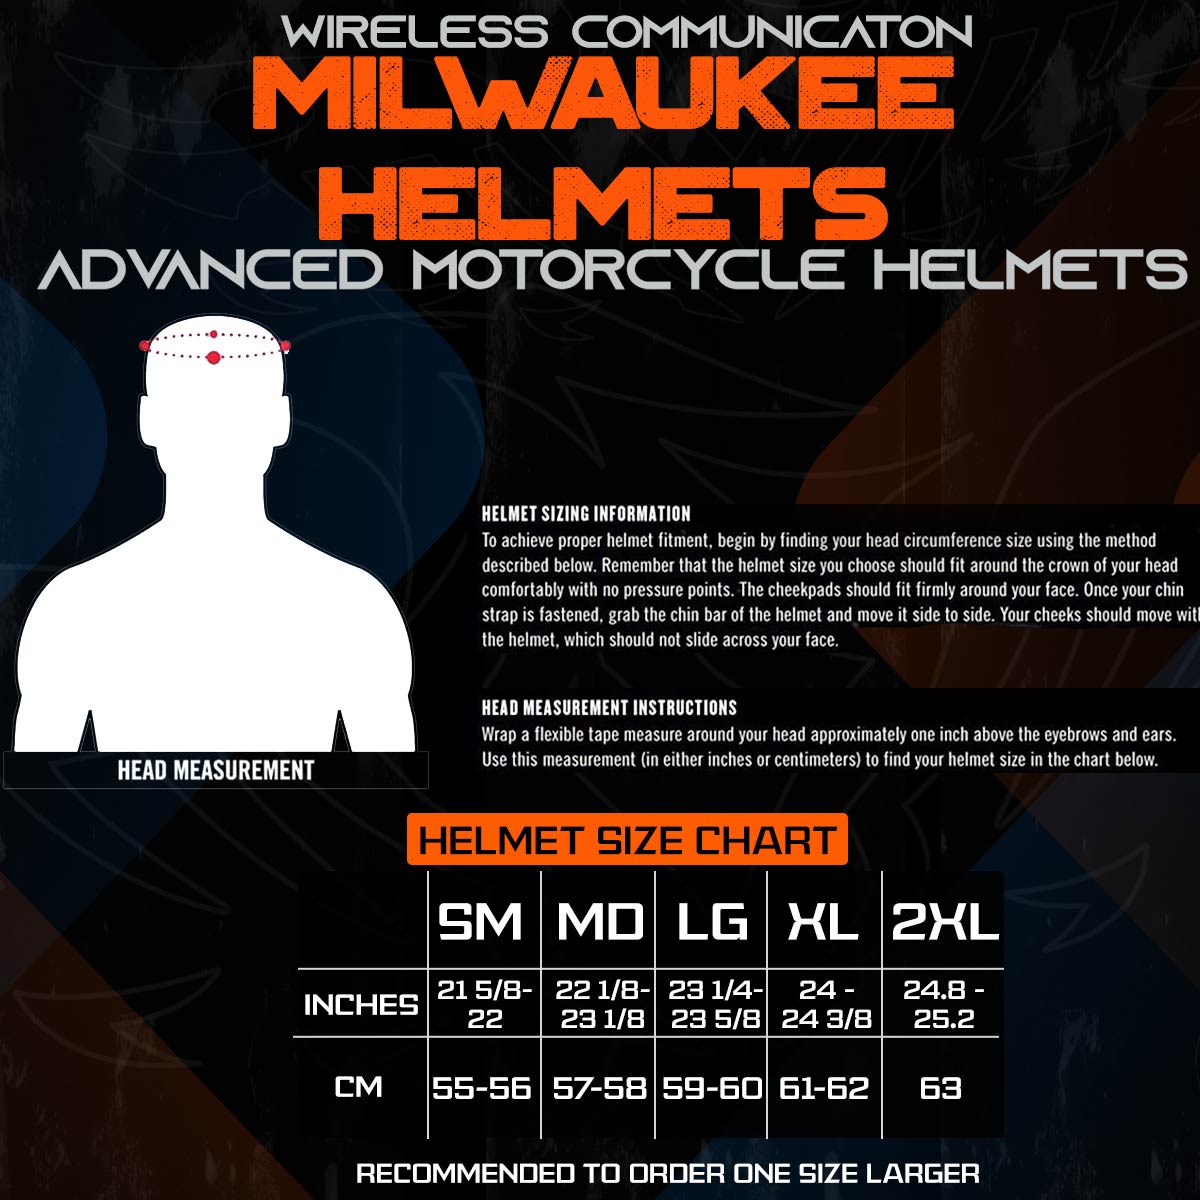 Milwaukee Helmets H512 Titanium and Blue Chit-Chat Black Full Face Motorcycle Helmet w/ Intercom - Built-in Speaker and Microphone for Men / Women